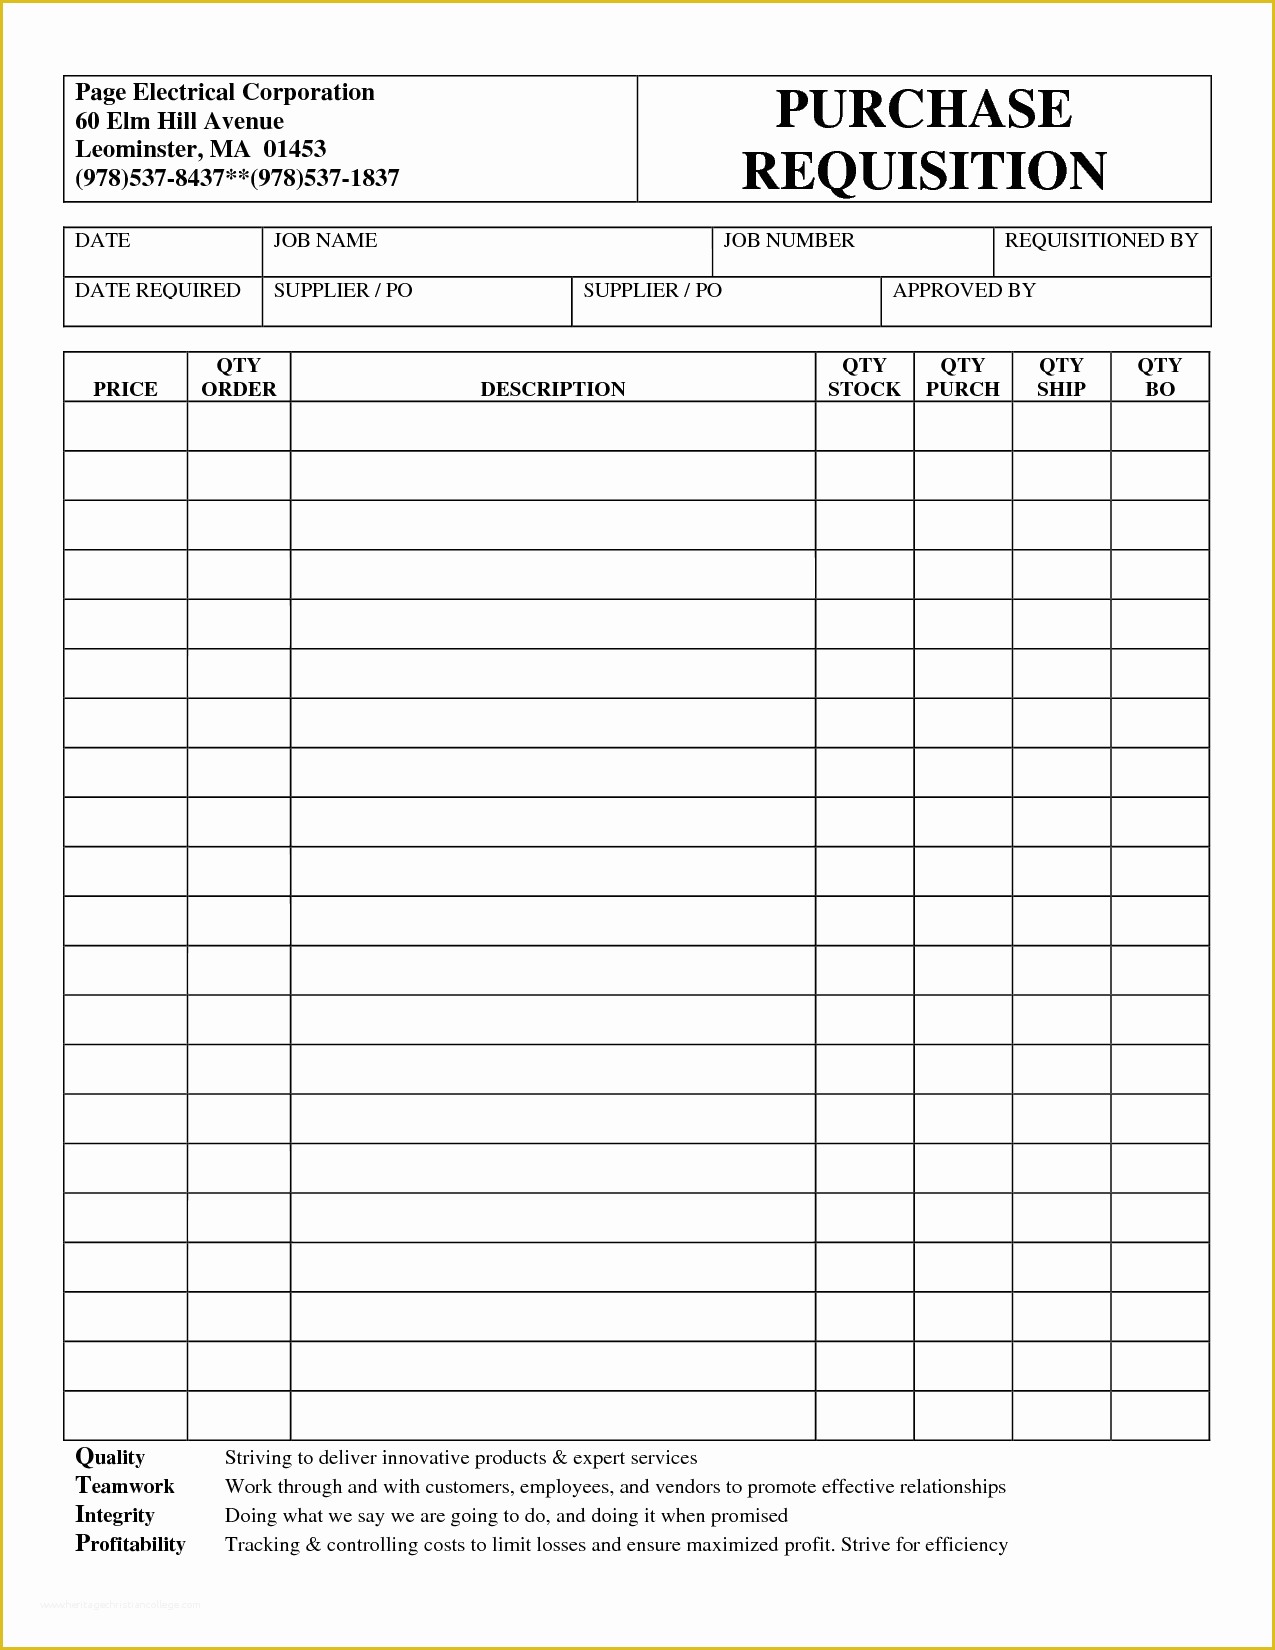 free-requisition-form-template-excel-of-best-s-of-purchase-requisition